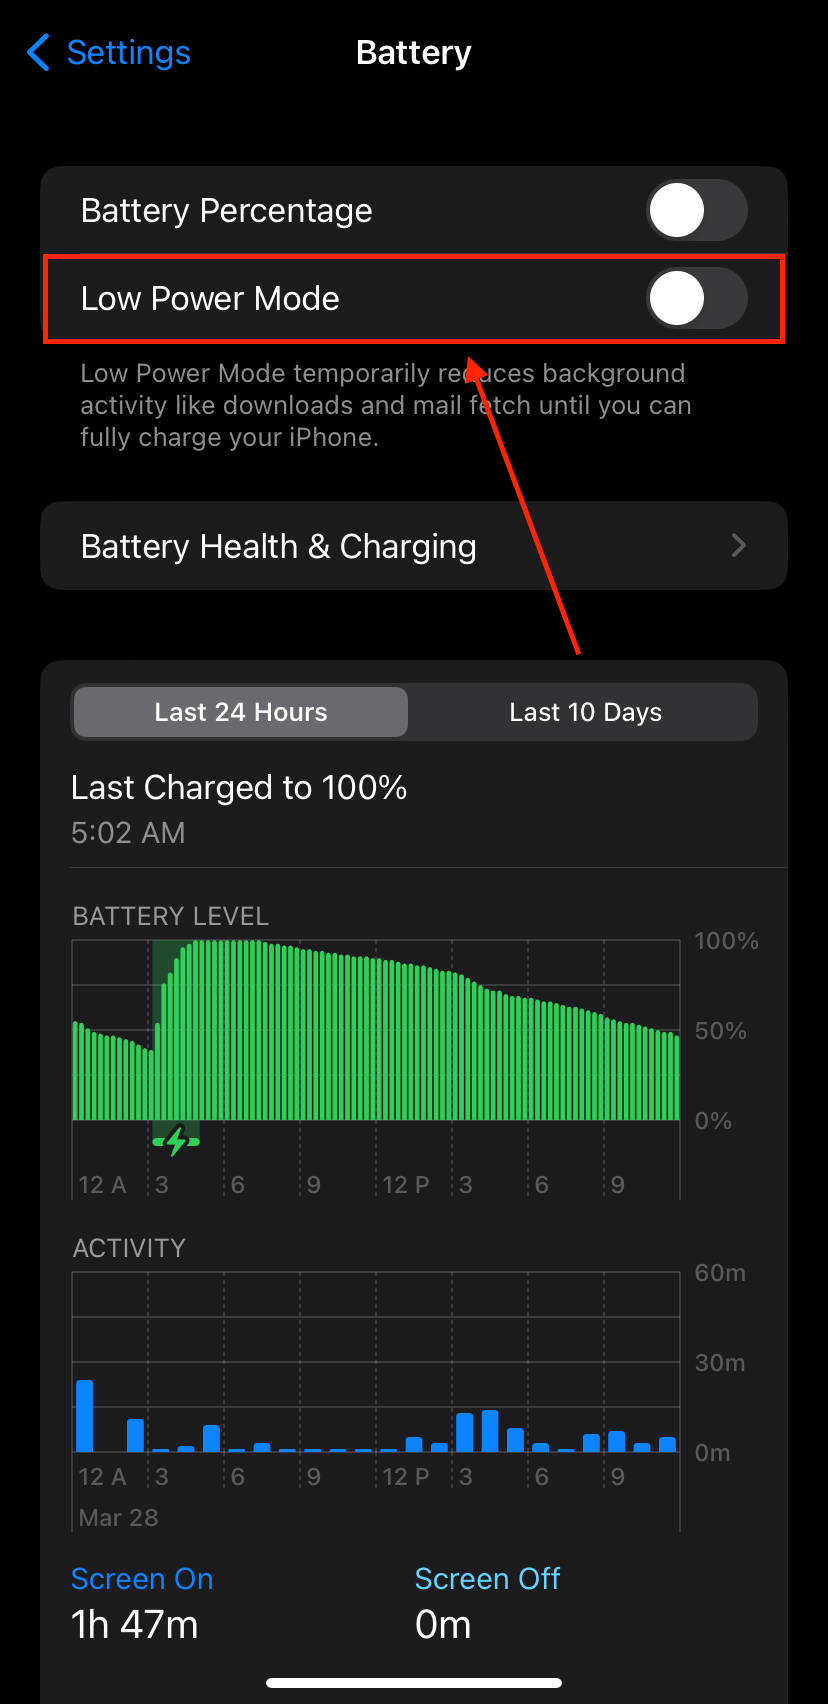 Low Power Mode in iPhone battery settings